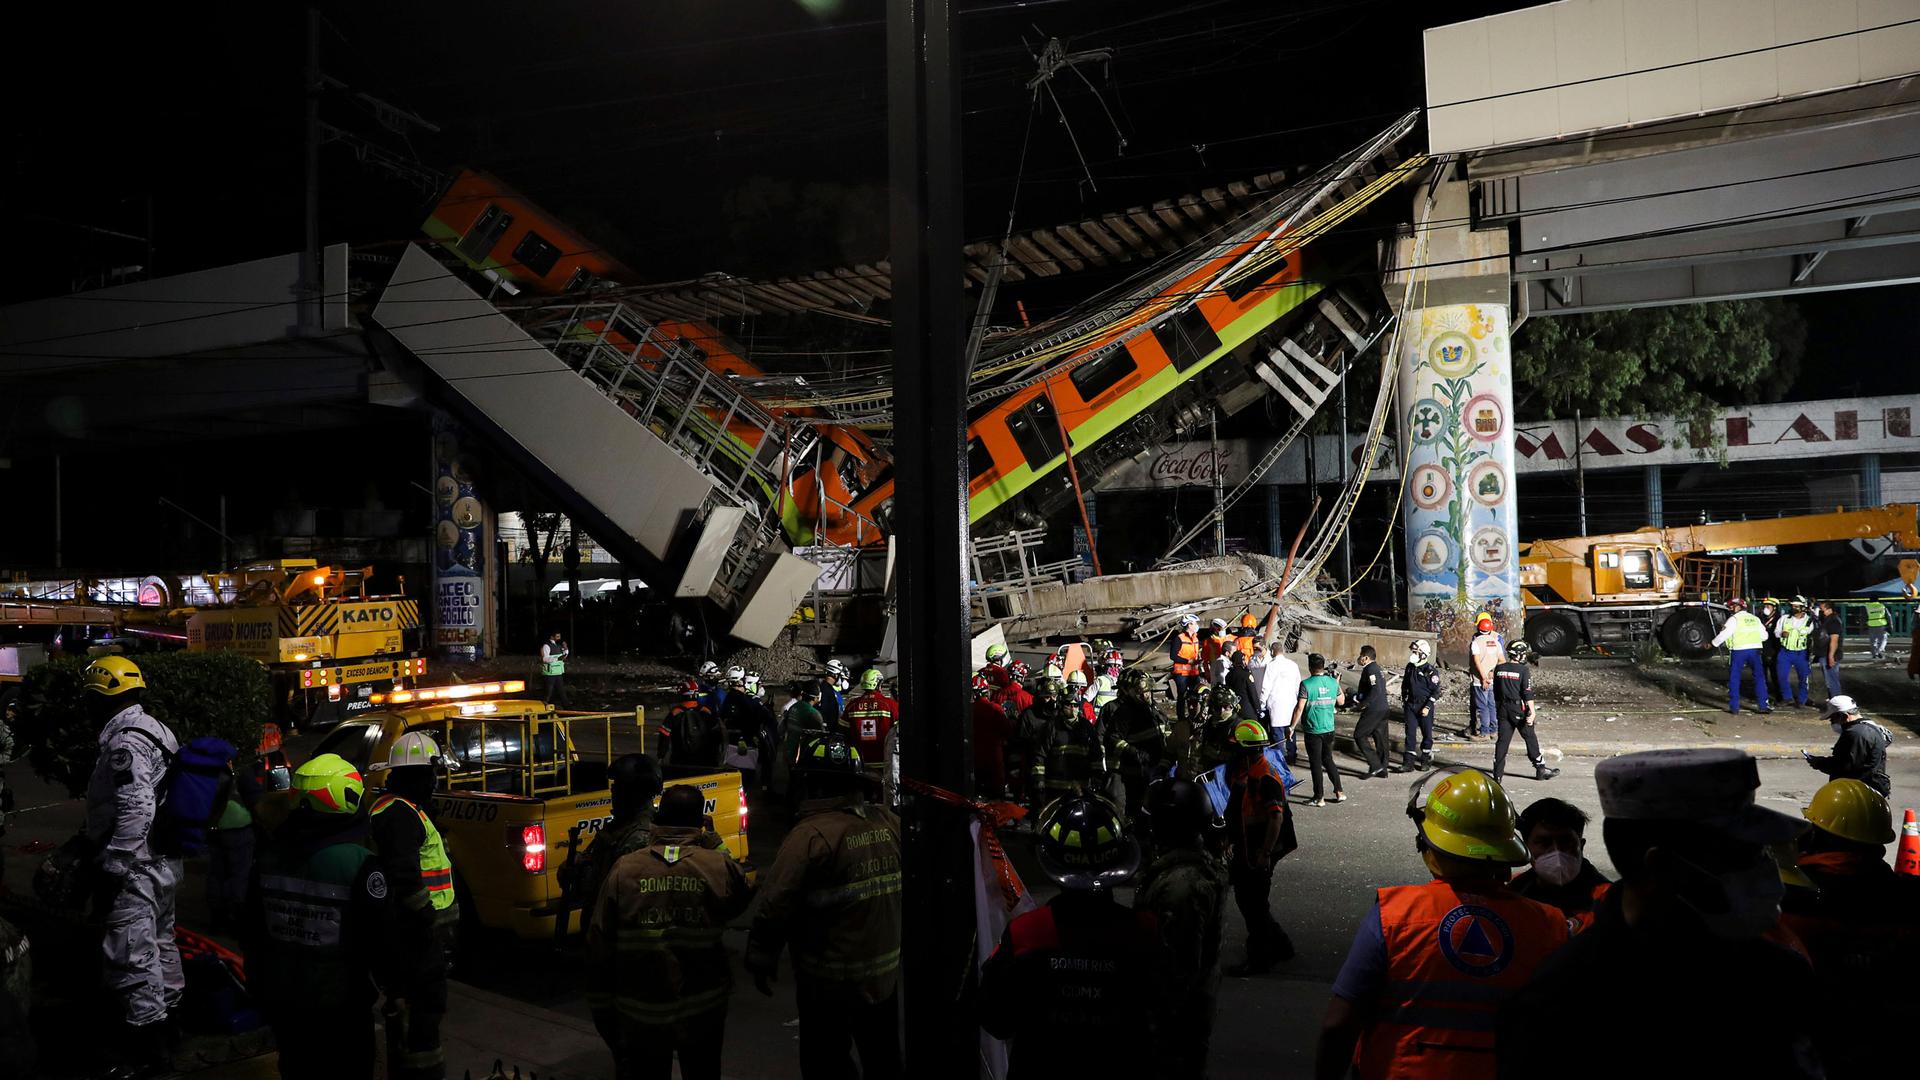 Two subway cars are show fallen from an elevated train track with rescue workers all around.